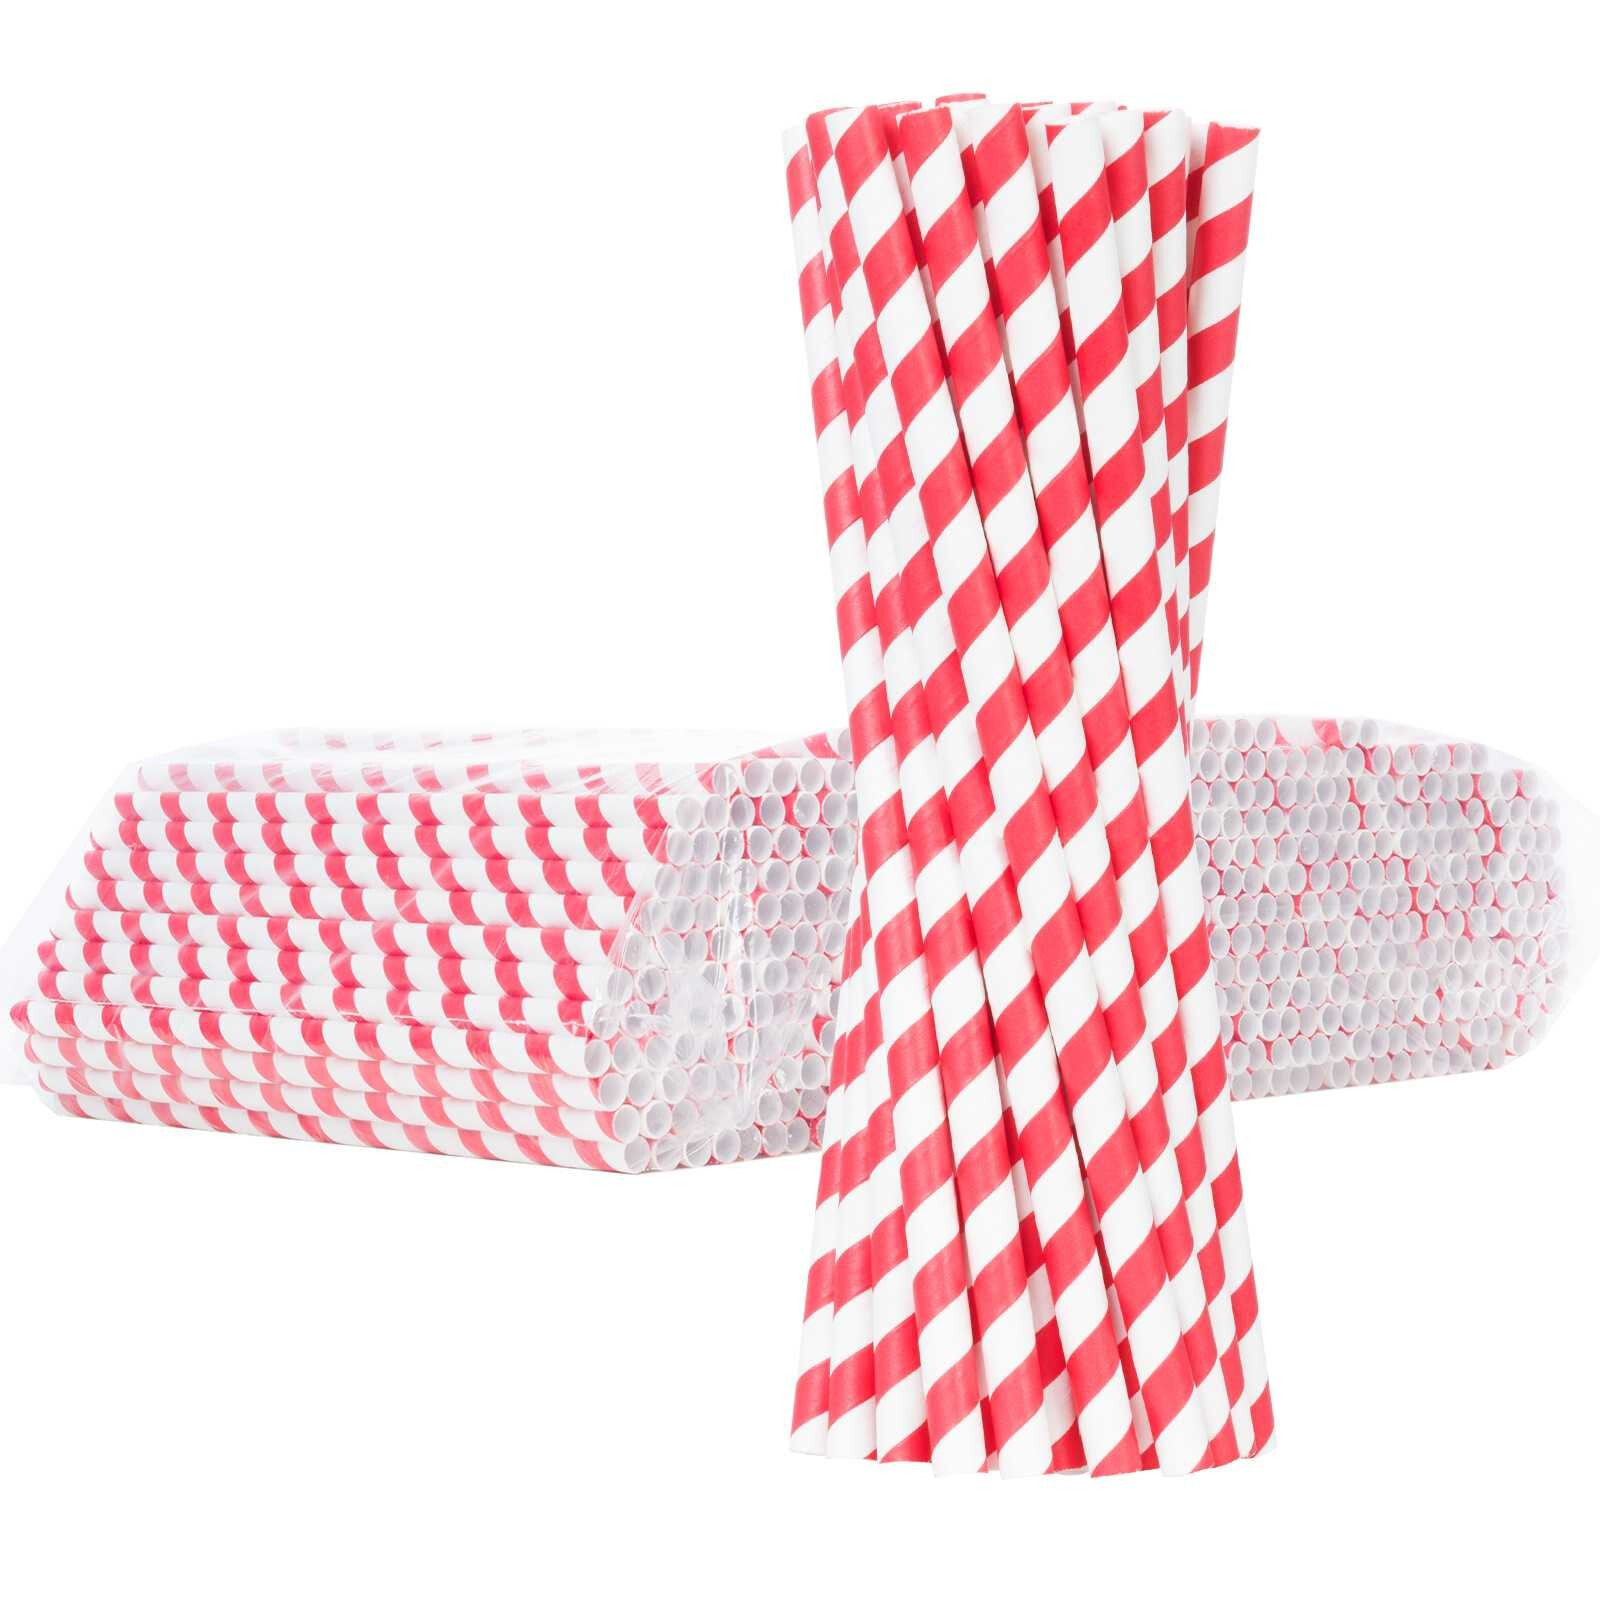 Paper straws BIO ecological PAPER STRAWS thick 8 / 205mm - white-red 500 pcs.